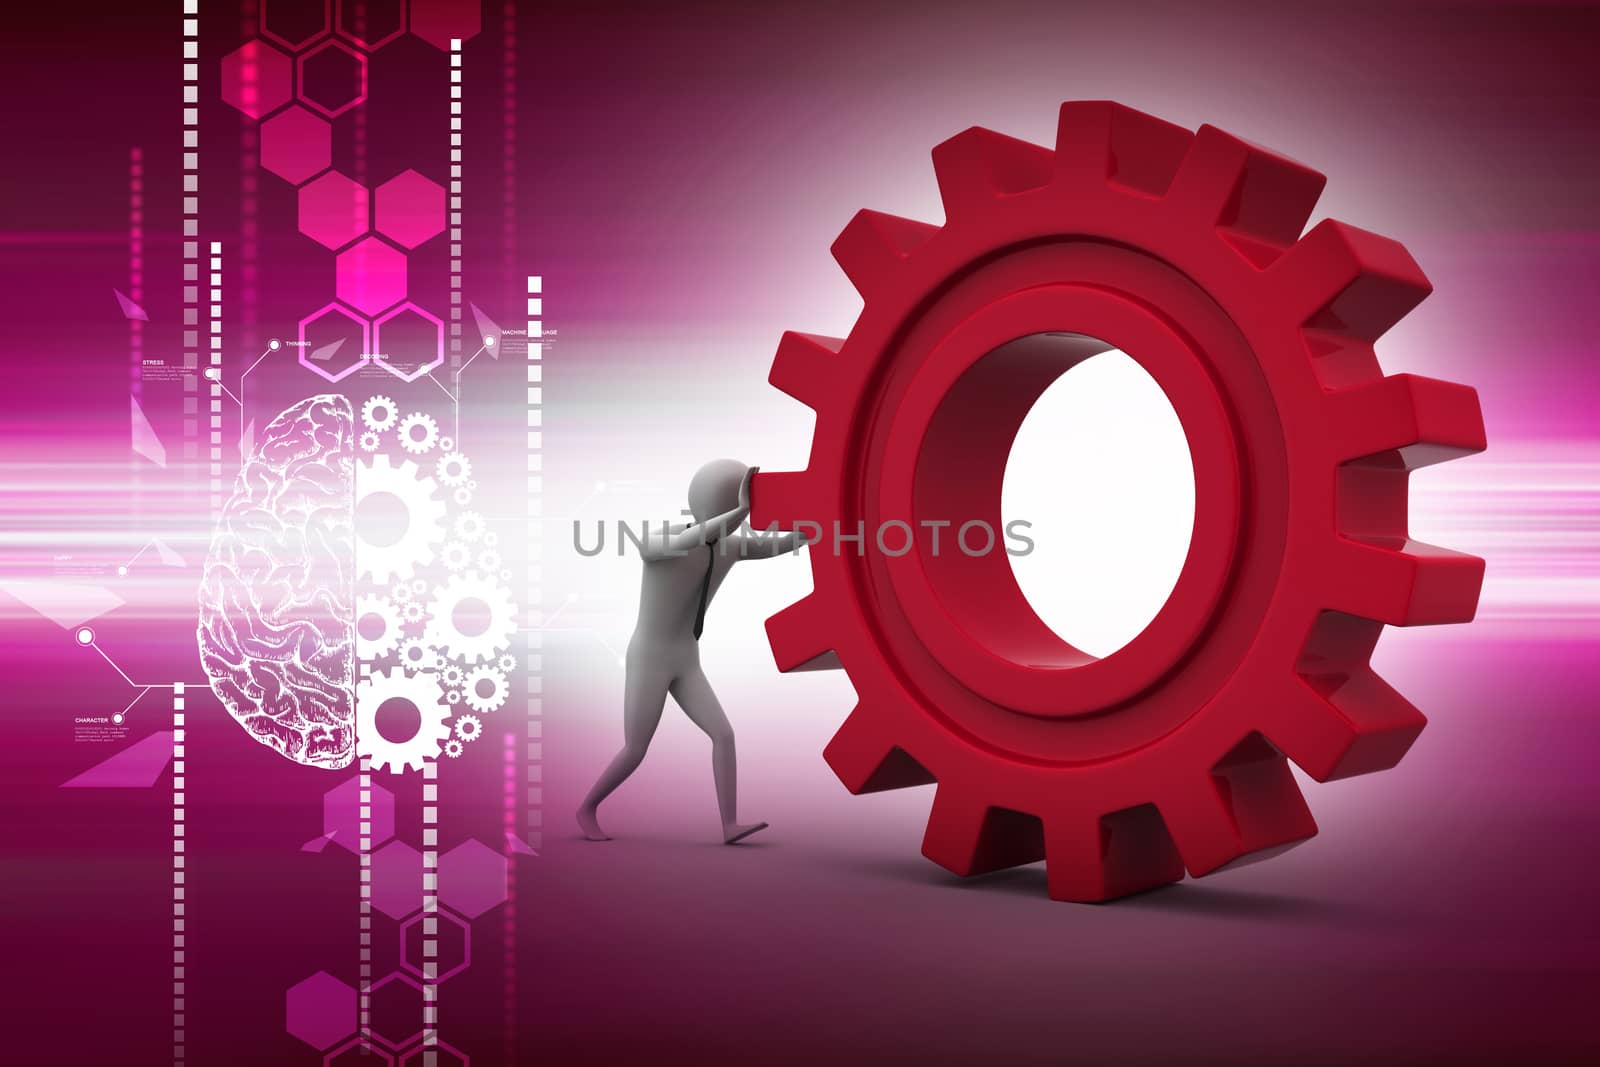 Man pushing gear wheel in color background